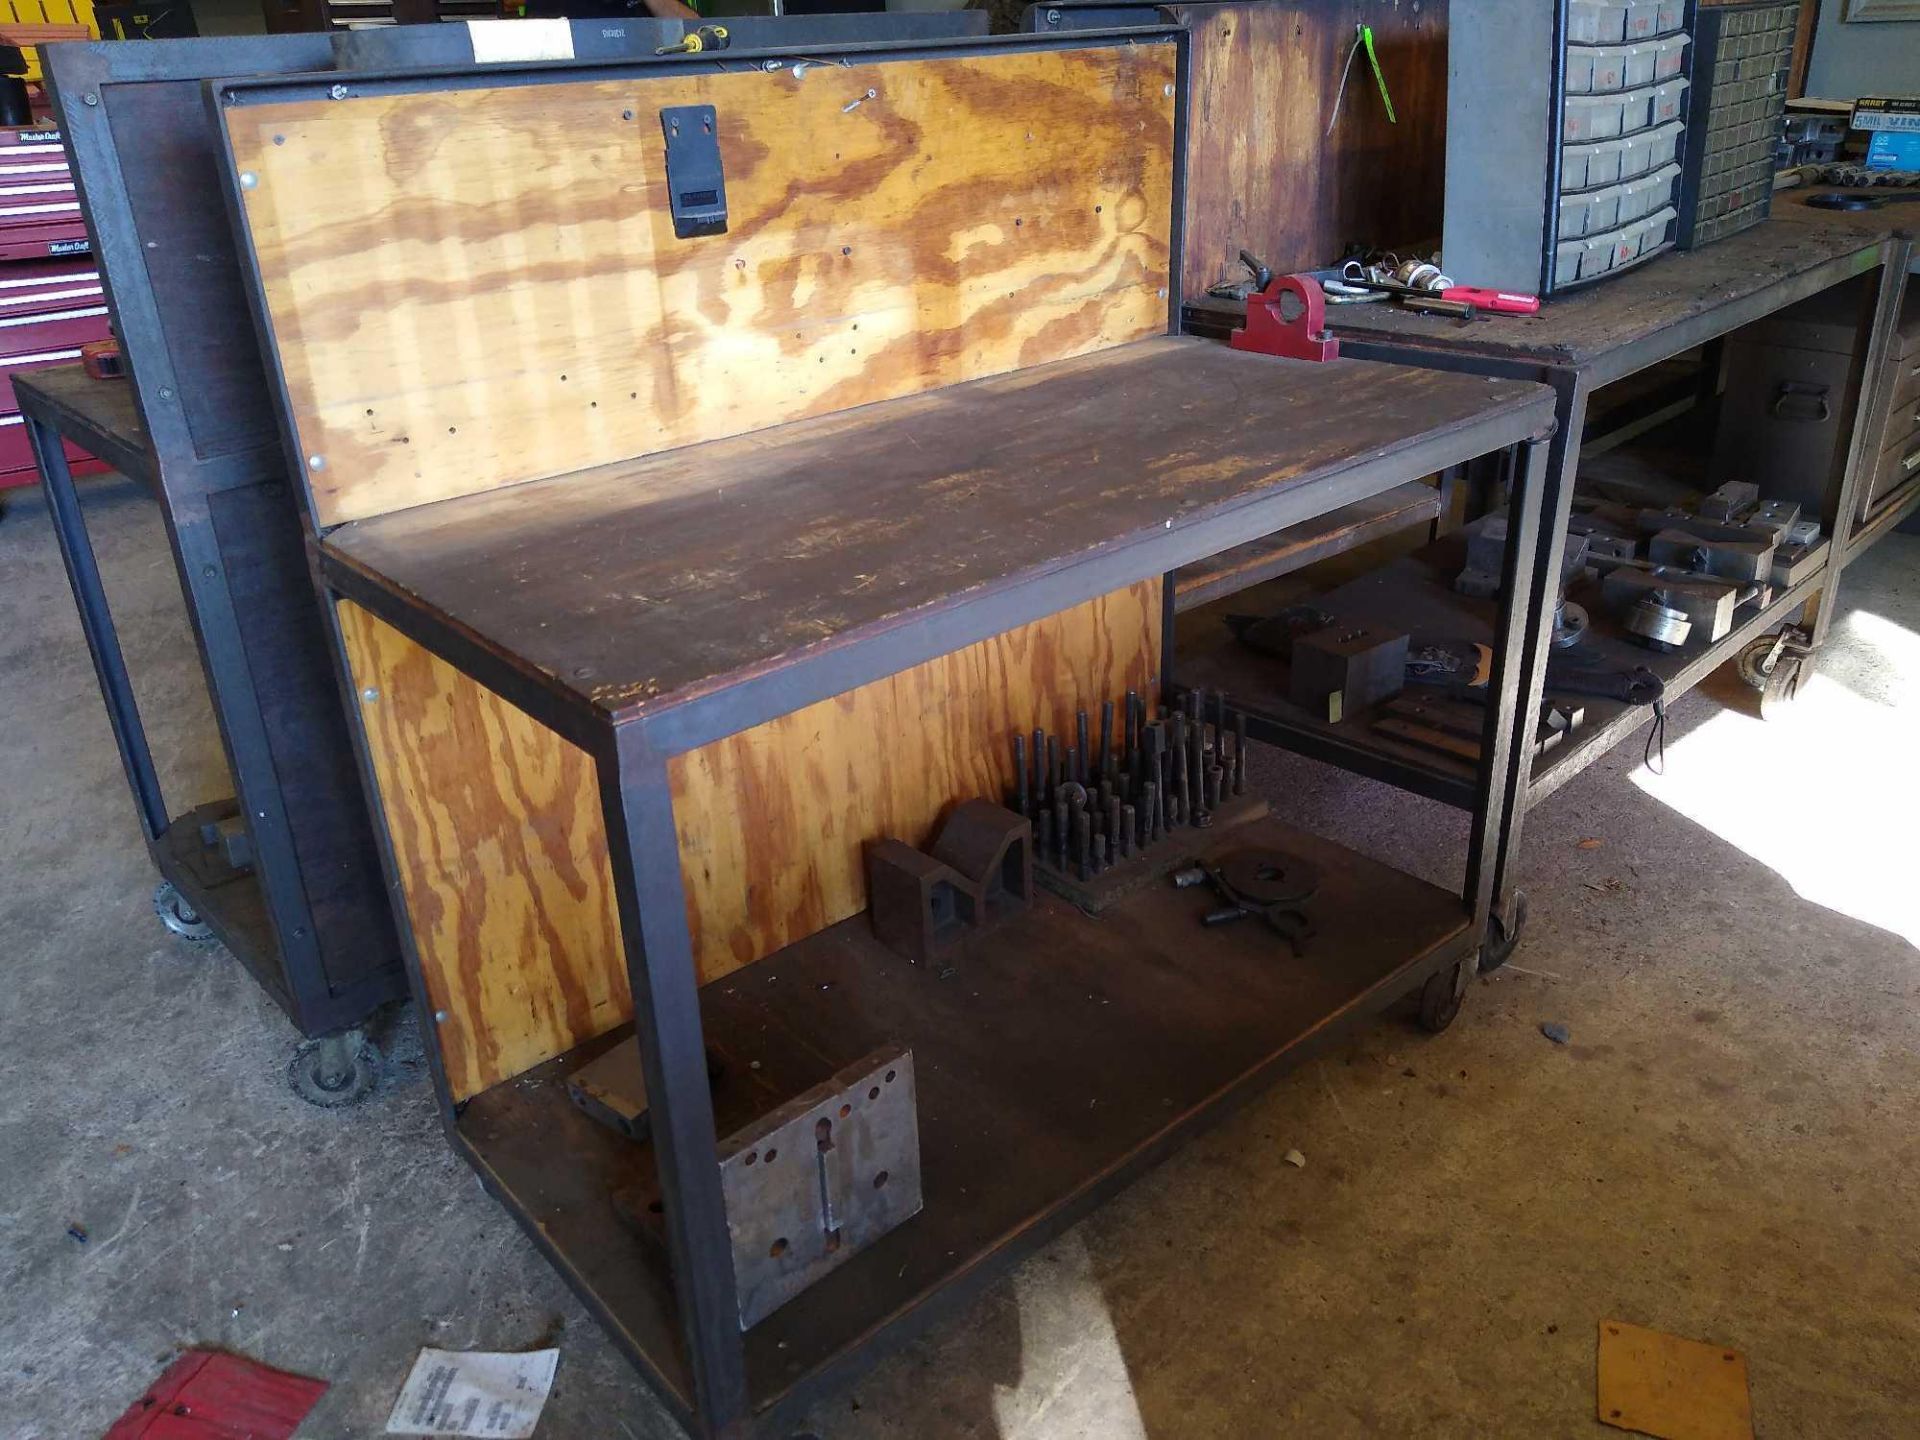 2 Tier Work Bench on Casters with Contents 48" x 23" x 36"